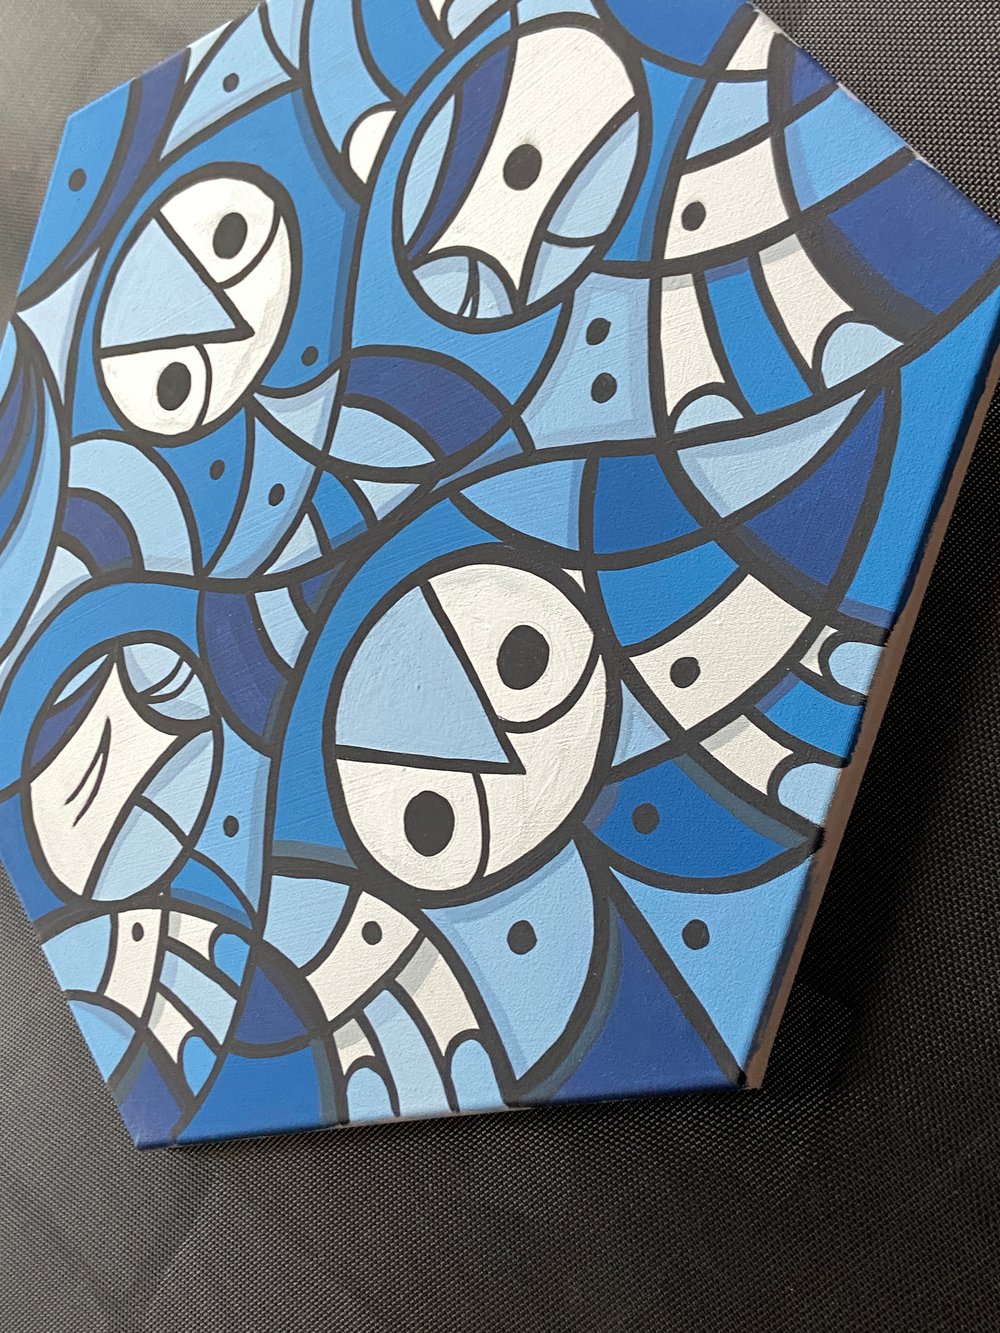 “The Shape of Things (Blue)” acrylic painting on Hexagon stretched canvas 